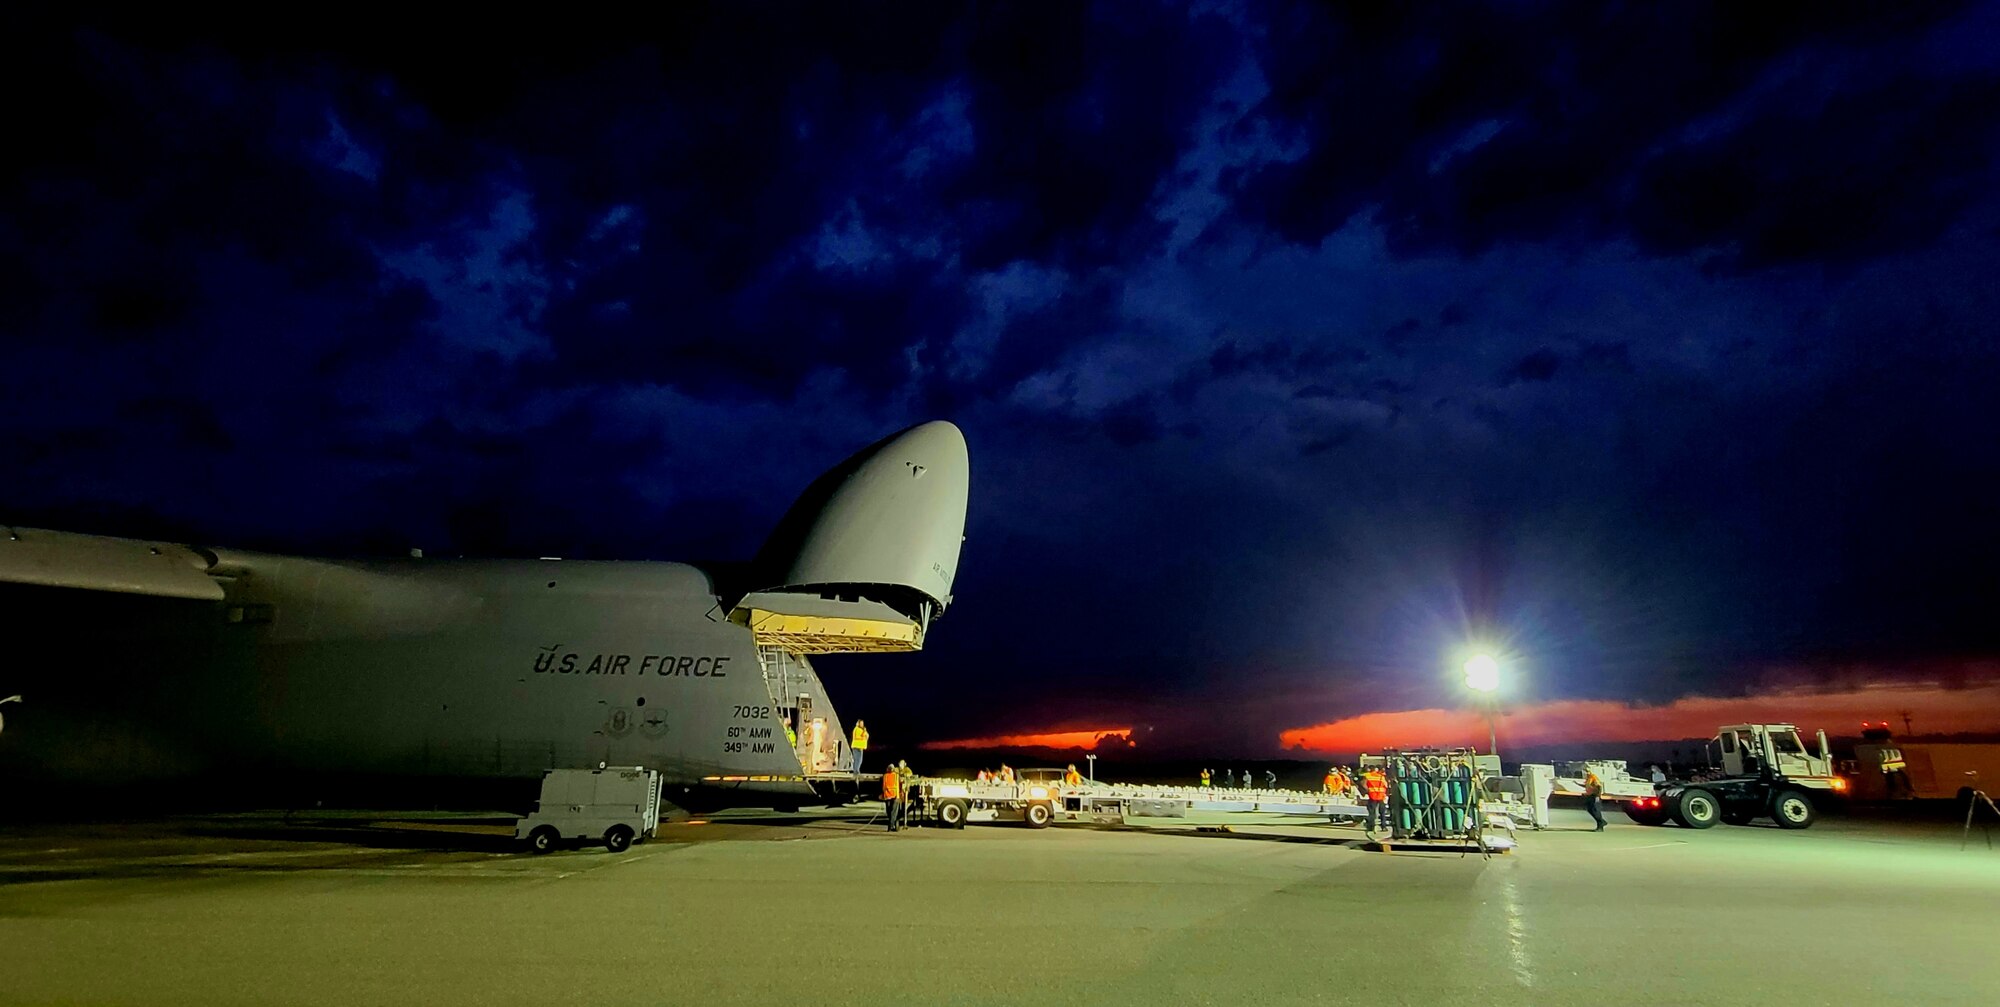 A ground crew unloads the SBIRS GEO-5 from a C-5 Galaxy at Cape Canaveral Air Force Station, Flo., March 18, 2021. The satellite was taken to a processing facility to undergo testing and fueling prior to encapsulation. The satellite is expected to launch in May 2021. (U.S. Air Force photo by Walter Talens)